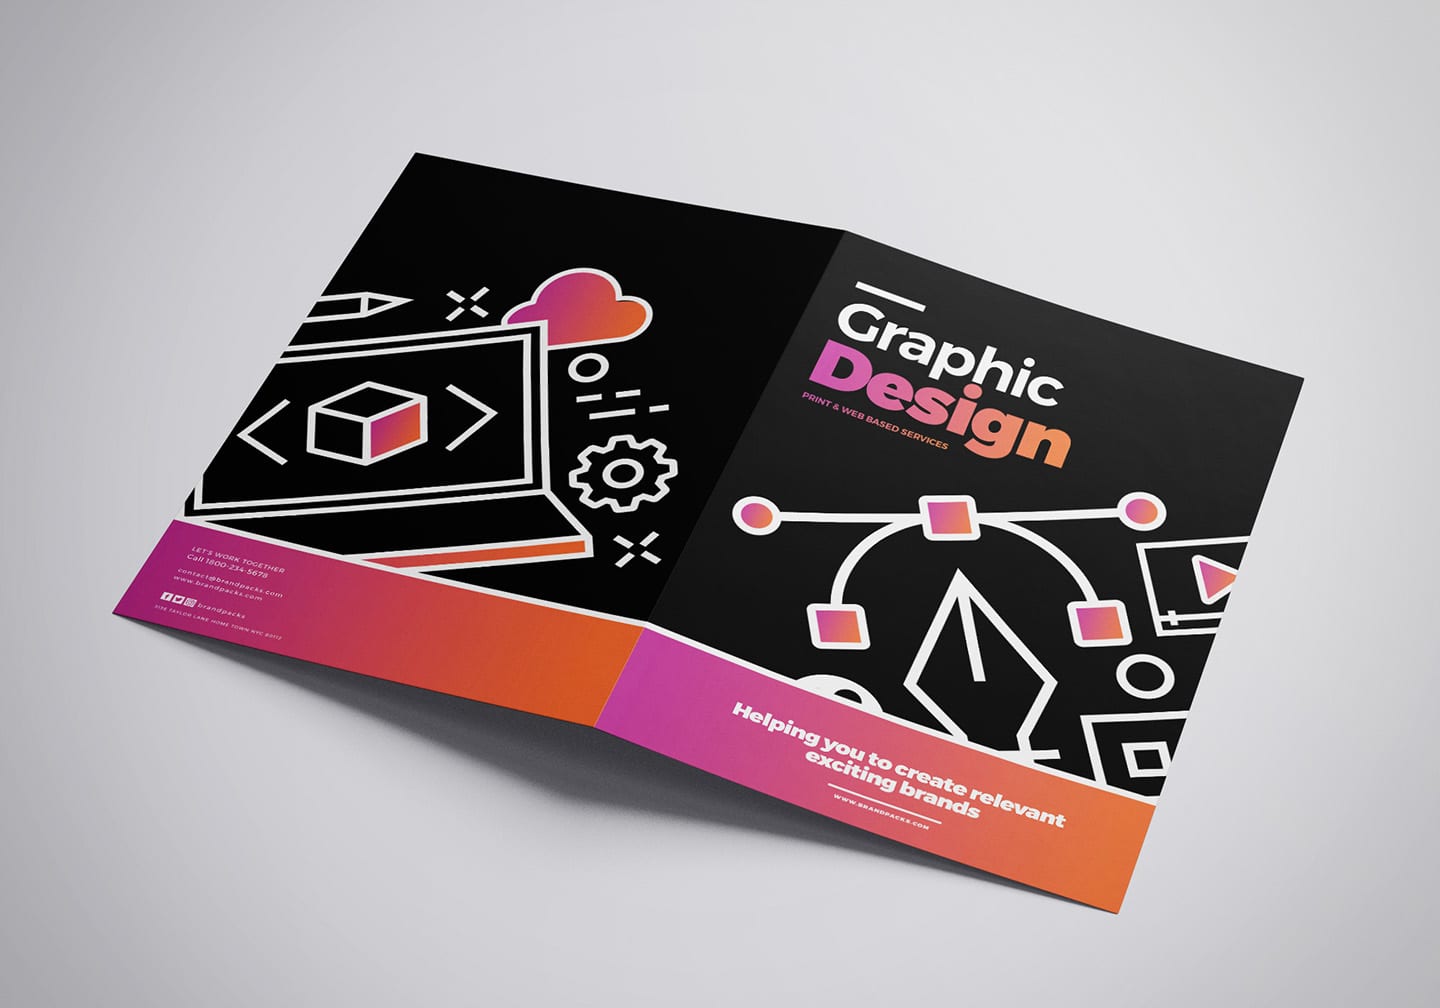  Graphic  Design  Agency Brochure  Template for Photoshop 